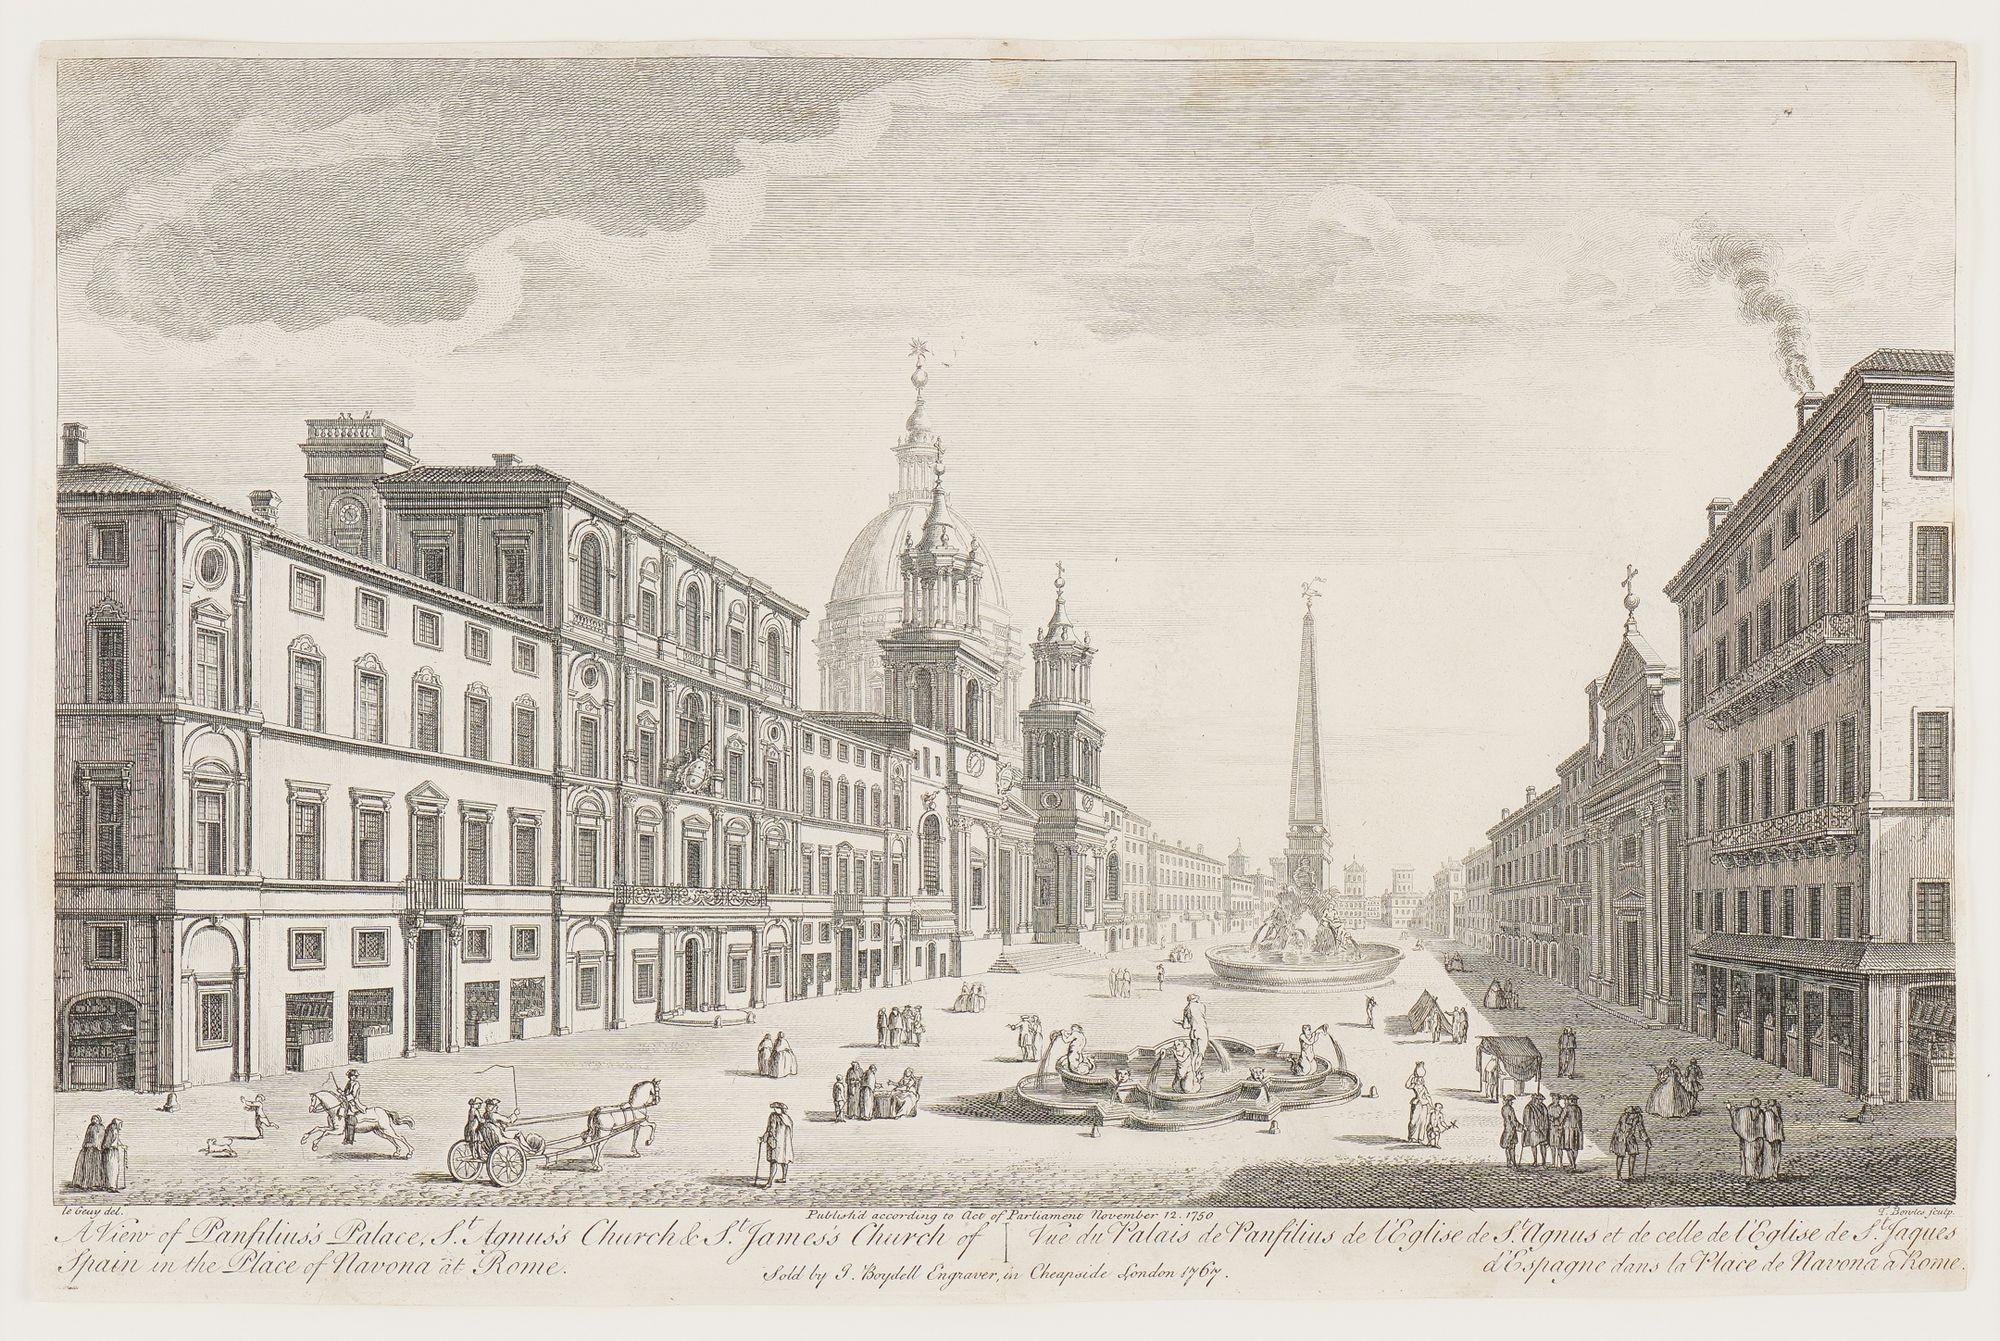 Engraving on laid paper of the Piazza Navona in Rome. The view is expansive, with the Fontana del Moro in the foreground, the Fiumi Fountain in the center of the piazza, and the dome of Sant'Agnese in Agone looming in the background.

Text below the